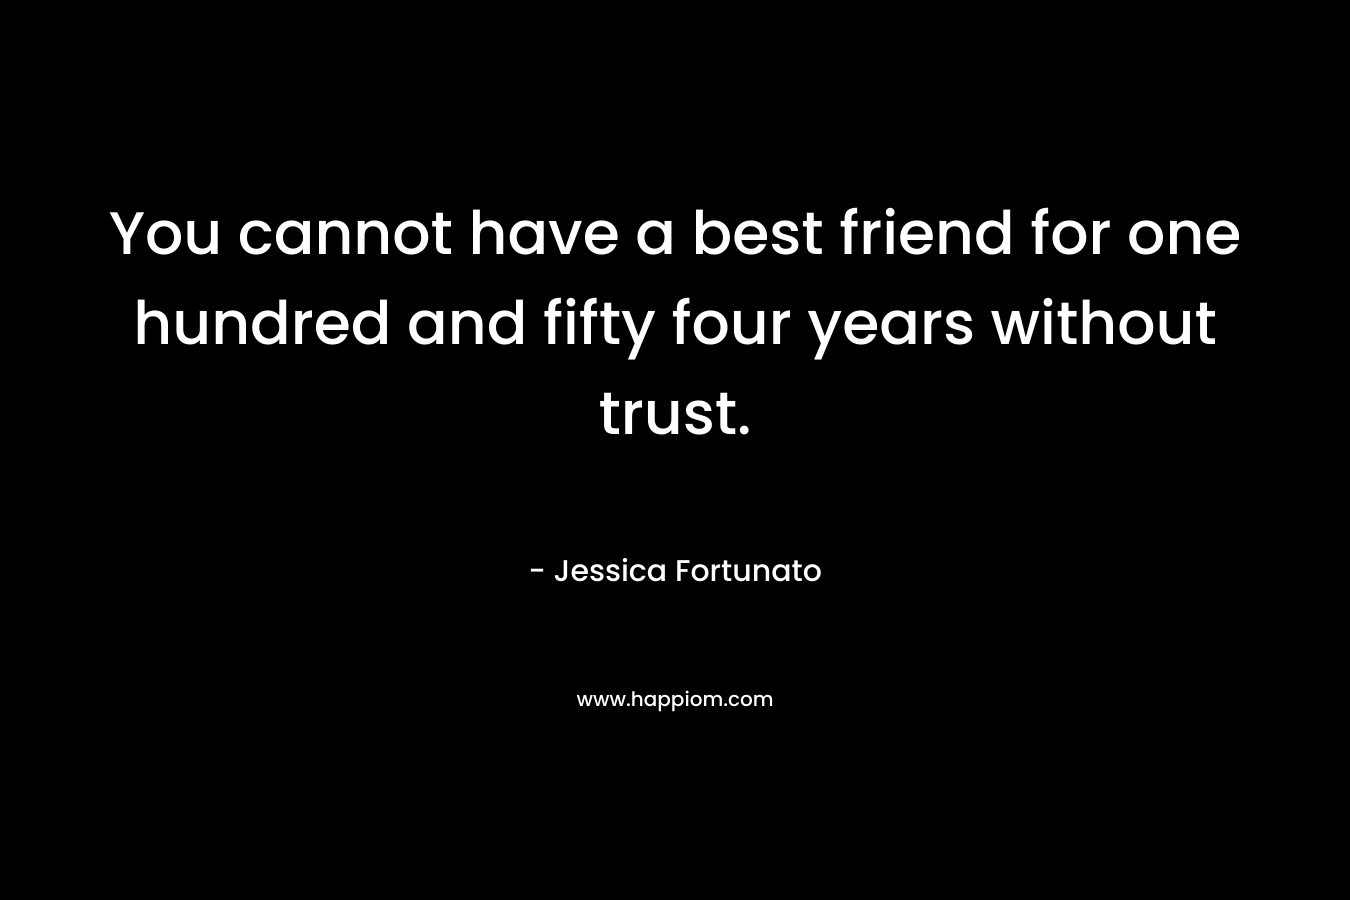 You cannot have a best friend for one hundred and fifty four years without trust. – Jessica Fortunato